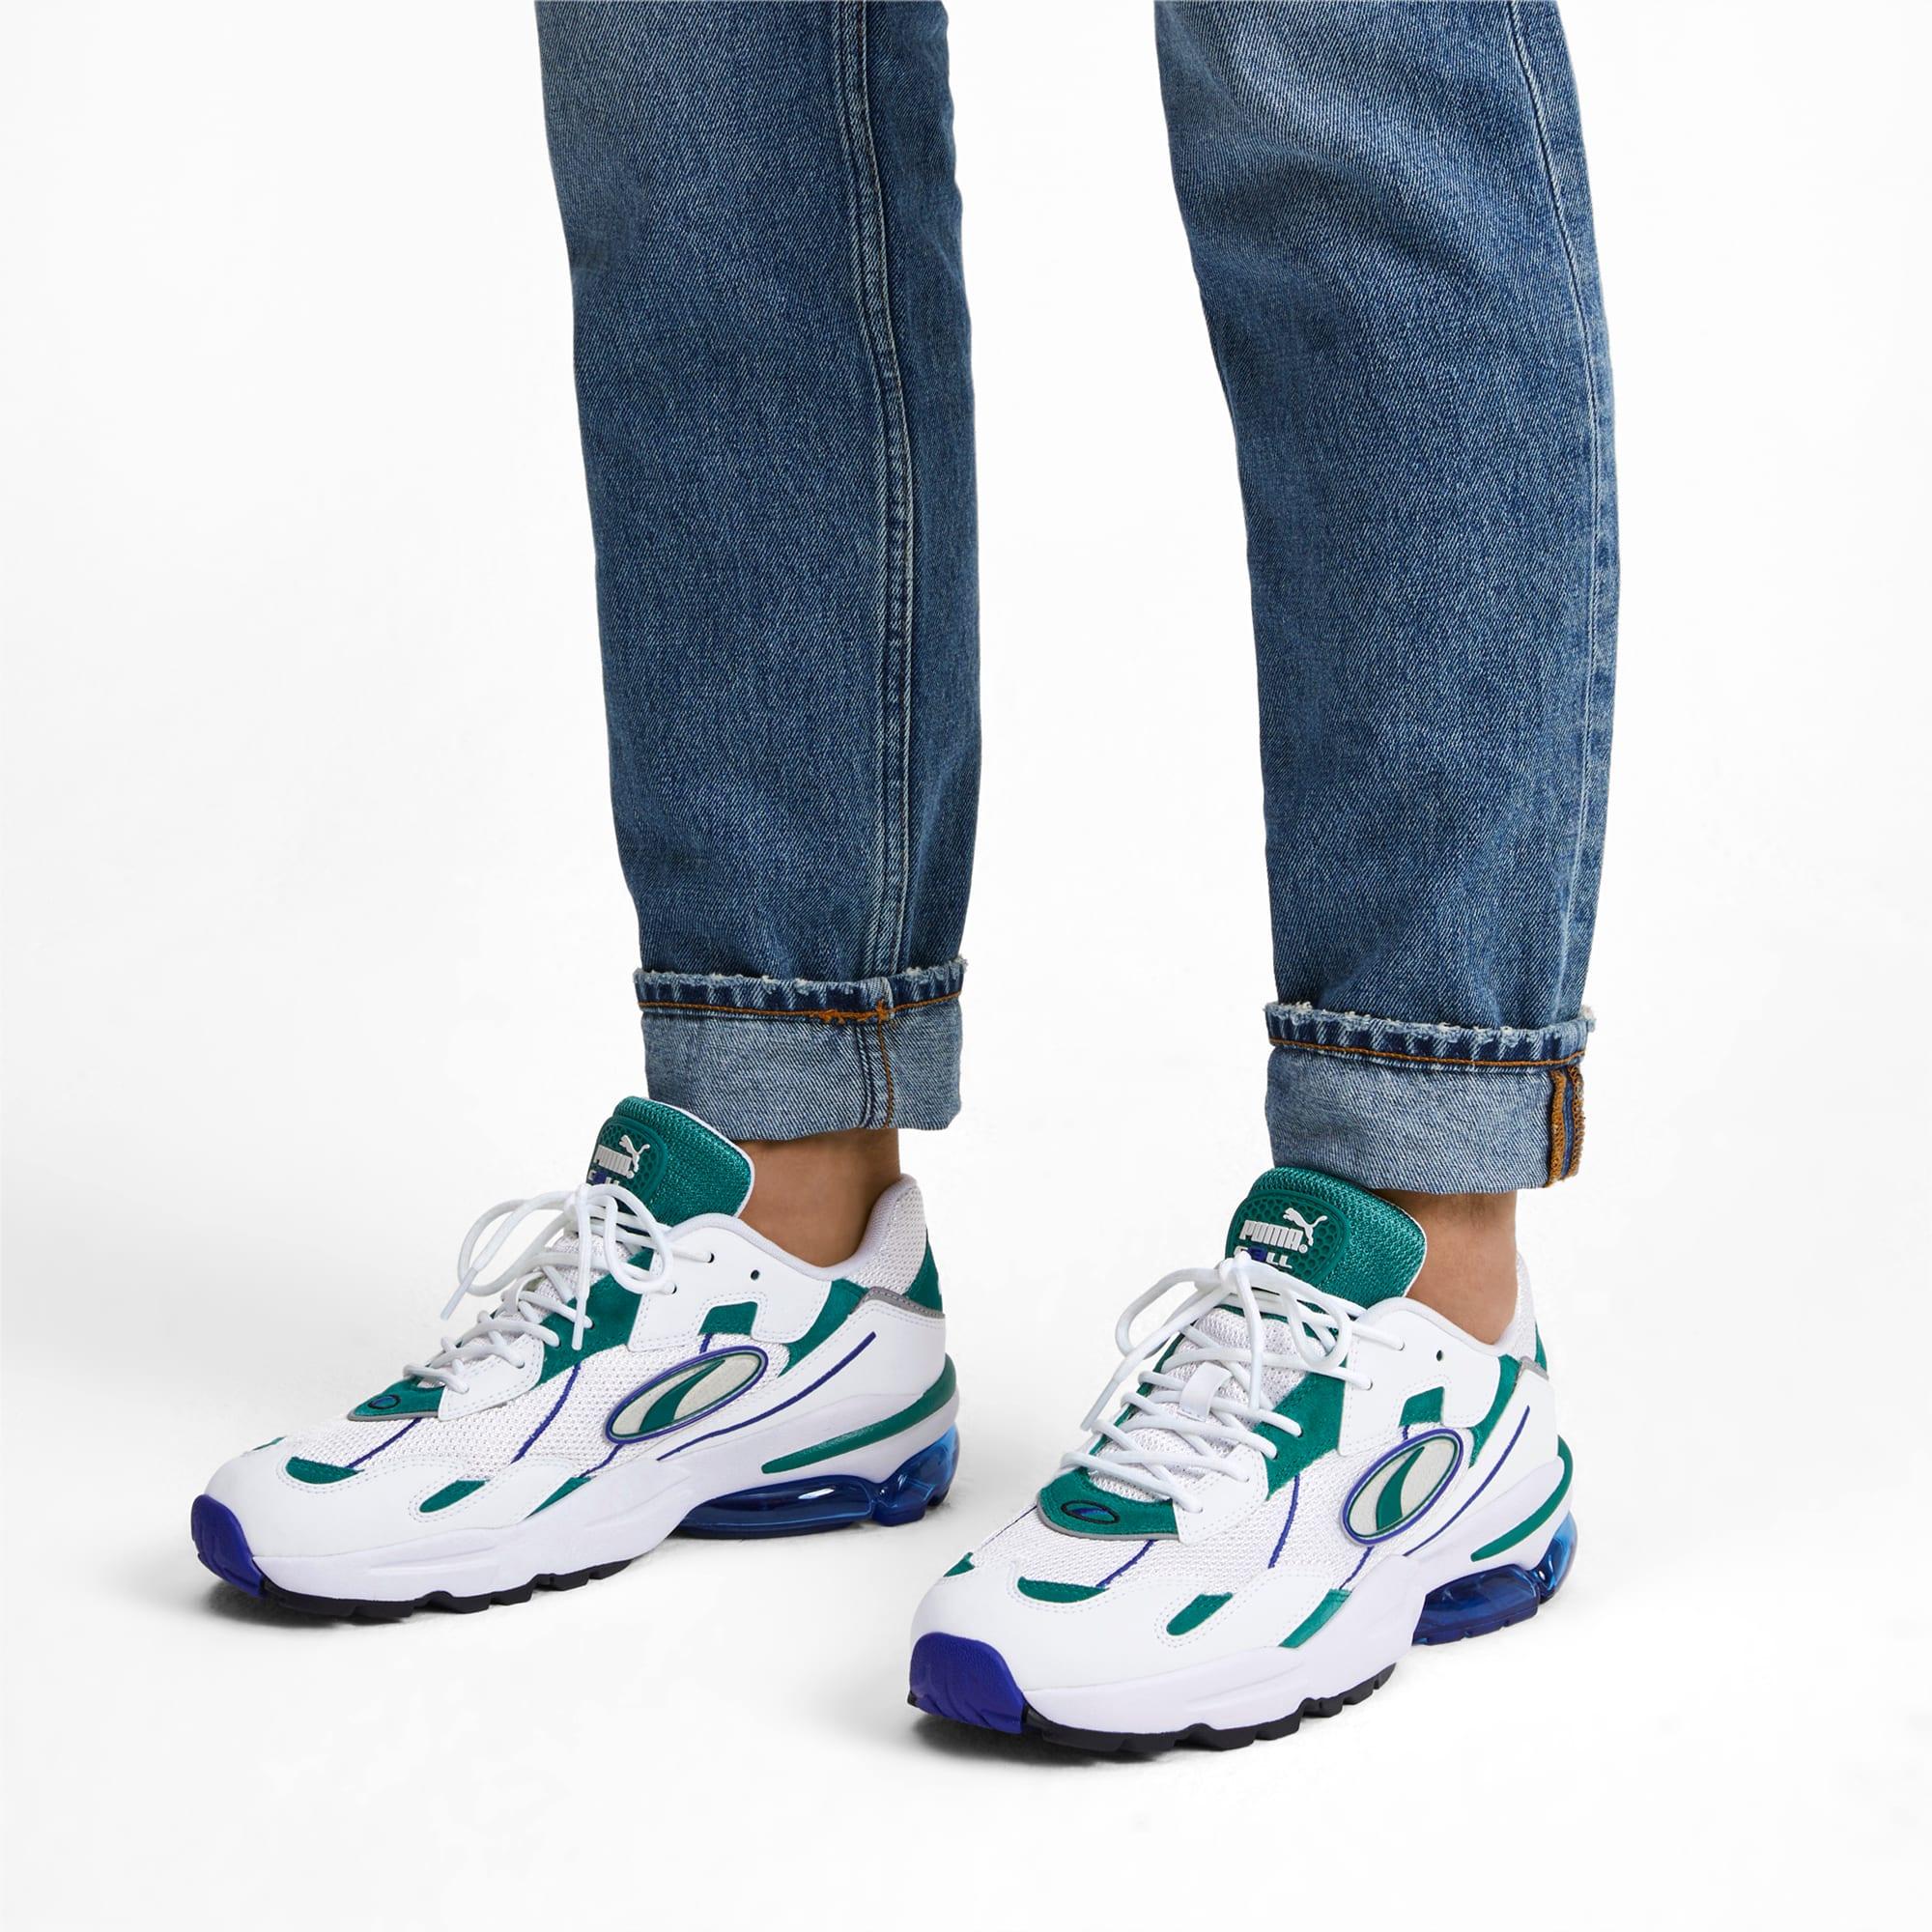 puma cell pack